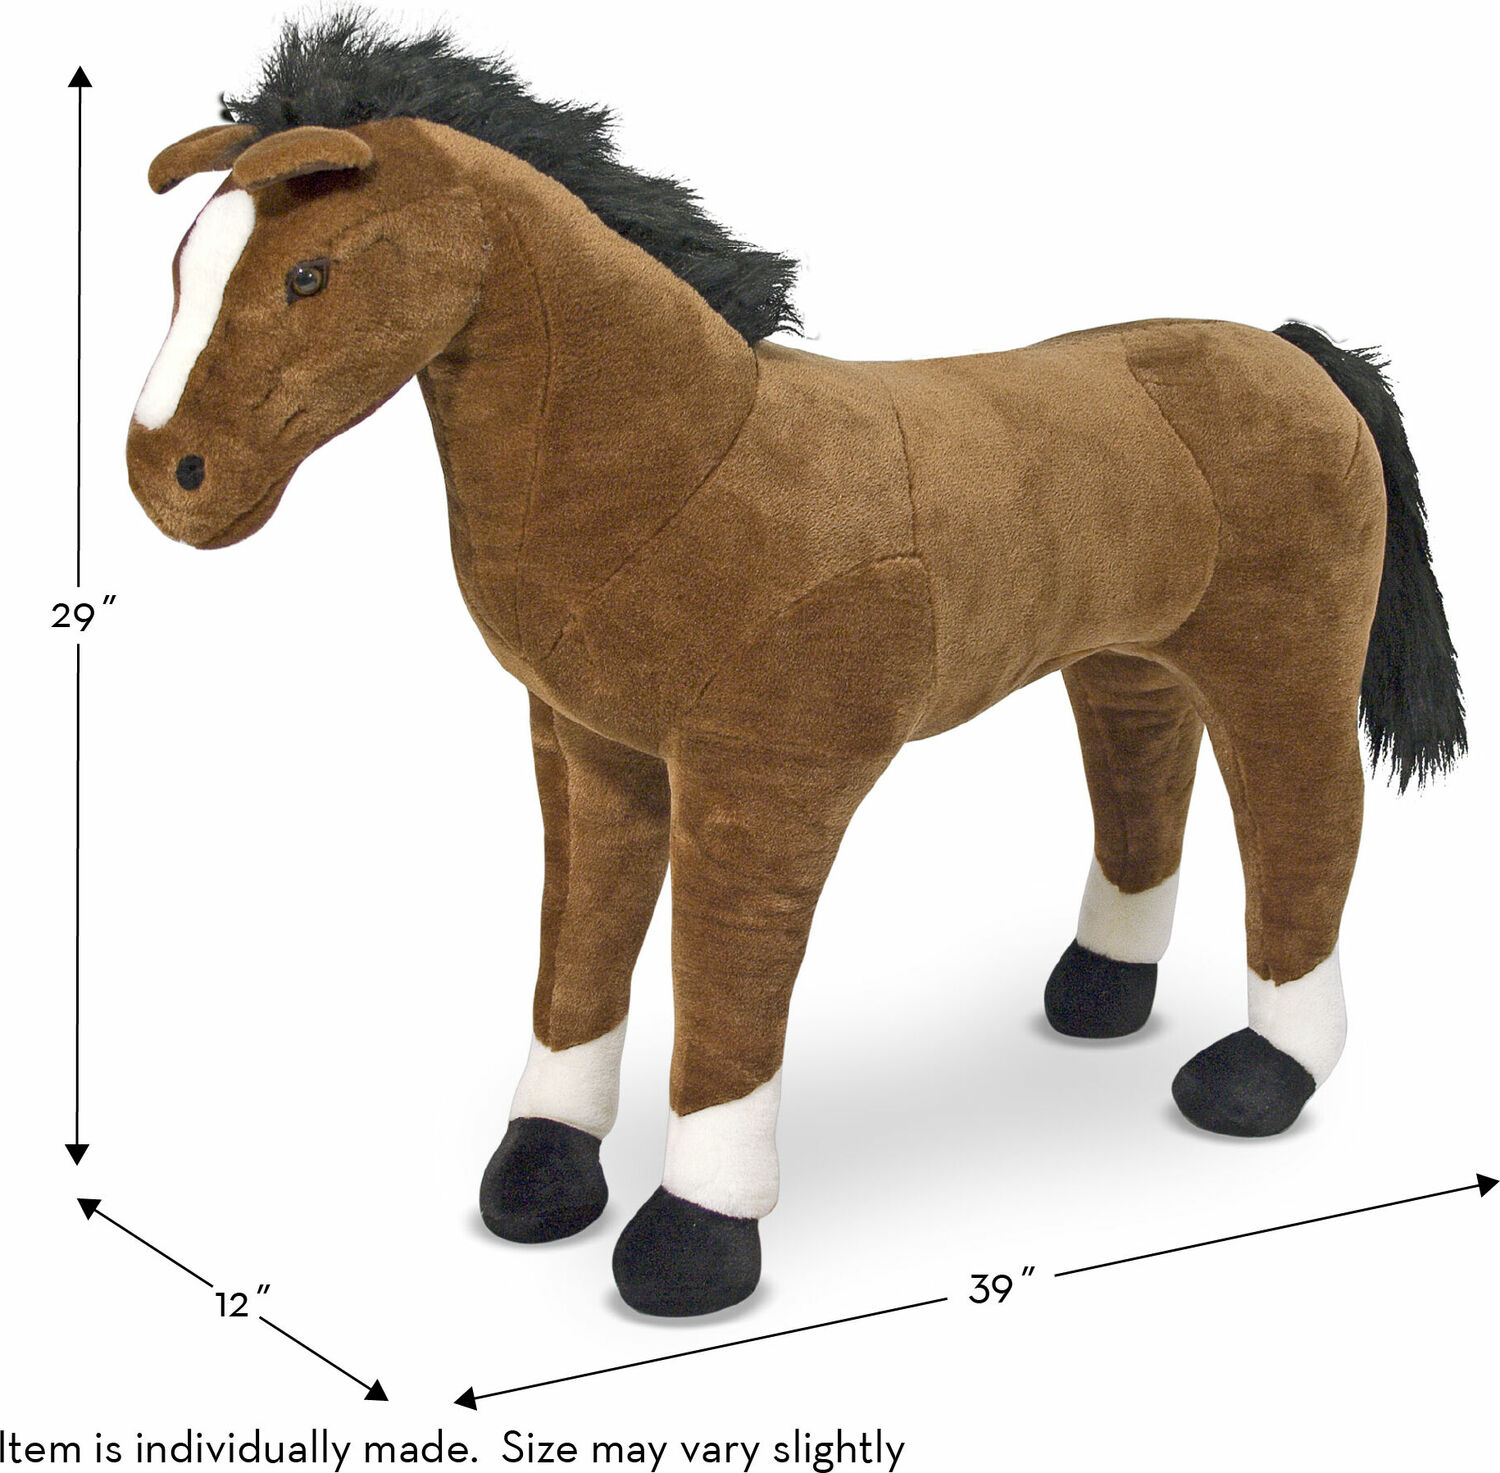 Details about   Fancytrader 31'' Giant Simulation Ride On Horse Plush Stuffed Horse Toy Kid Gift 